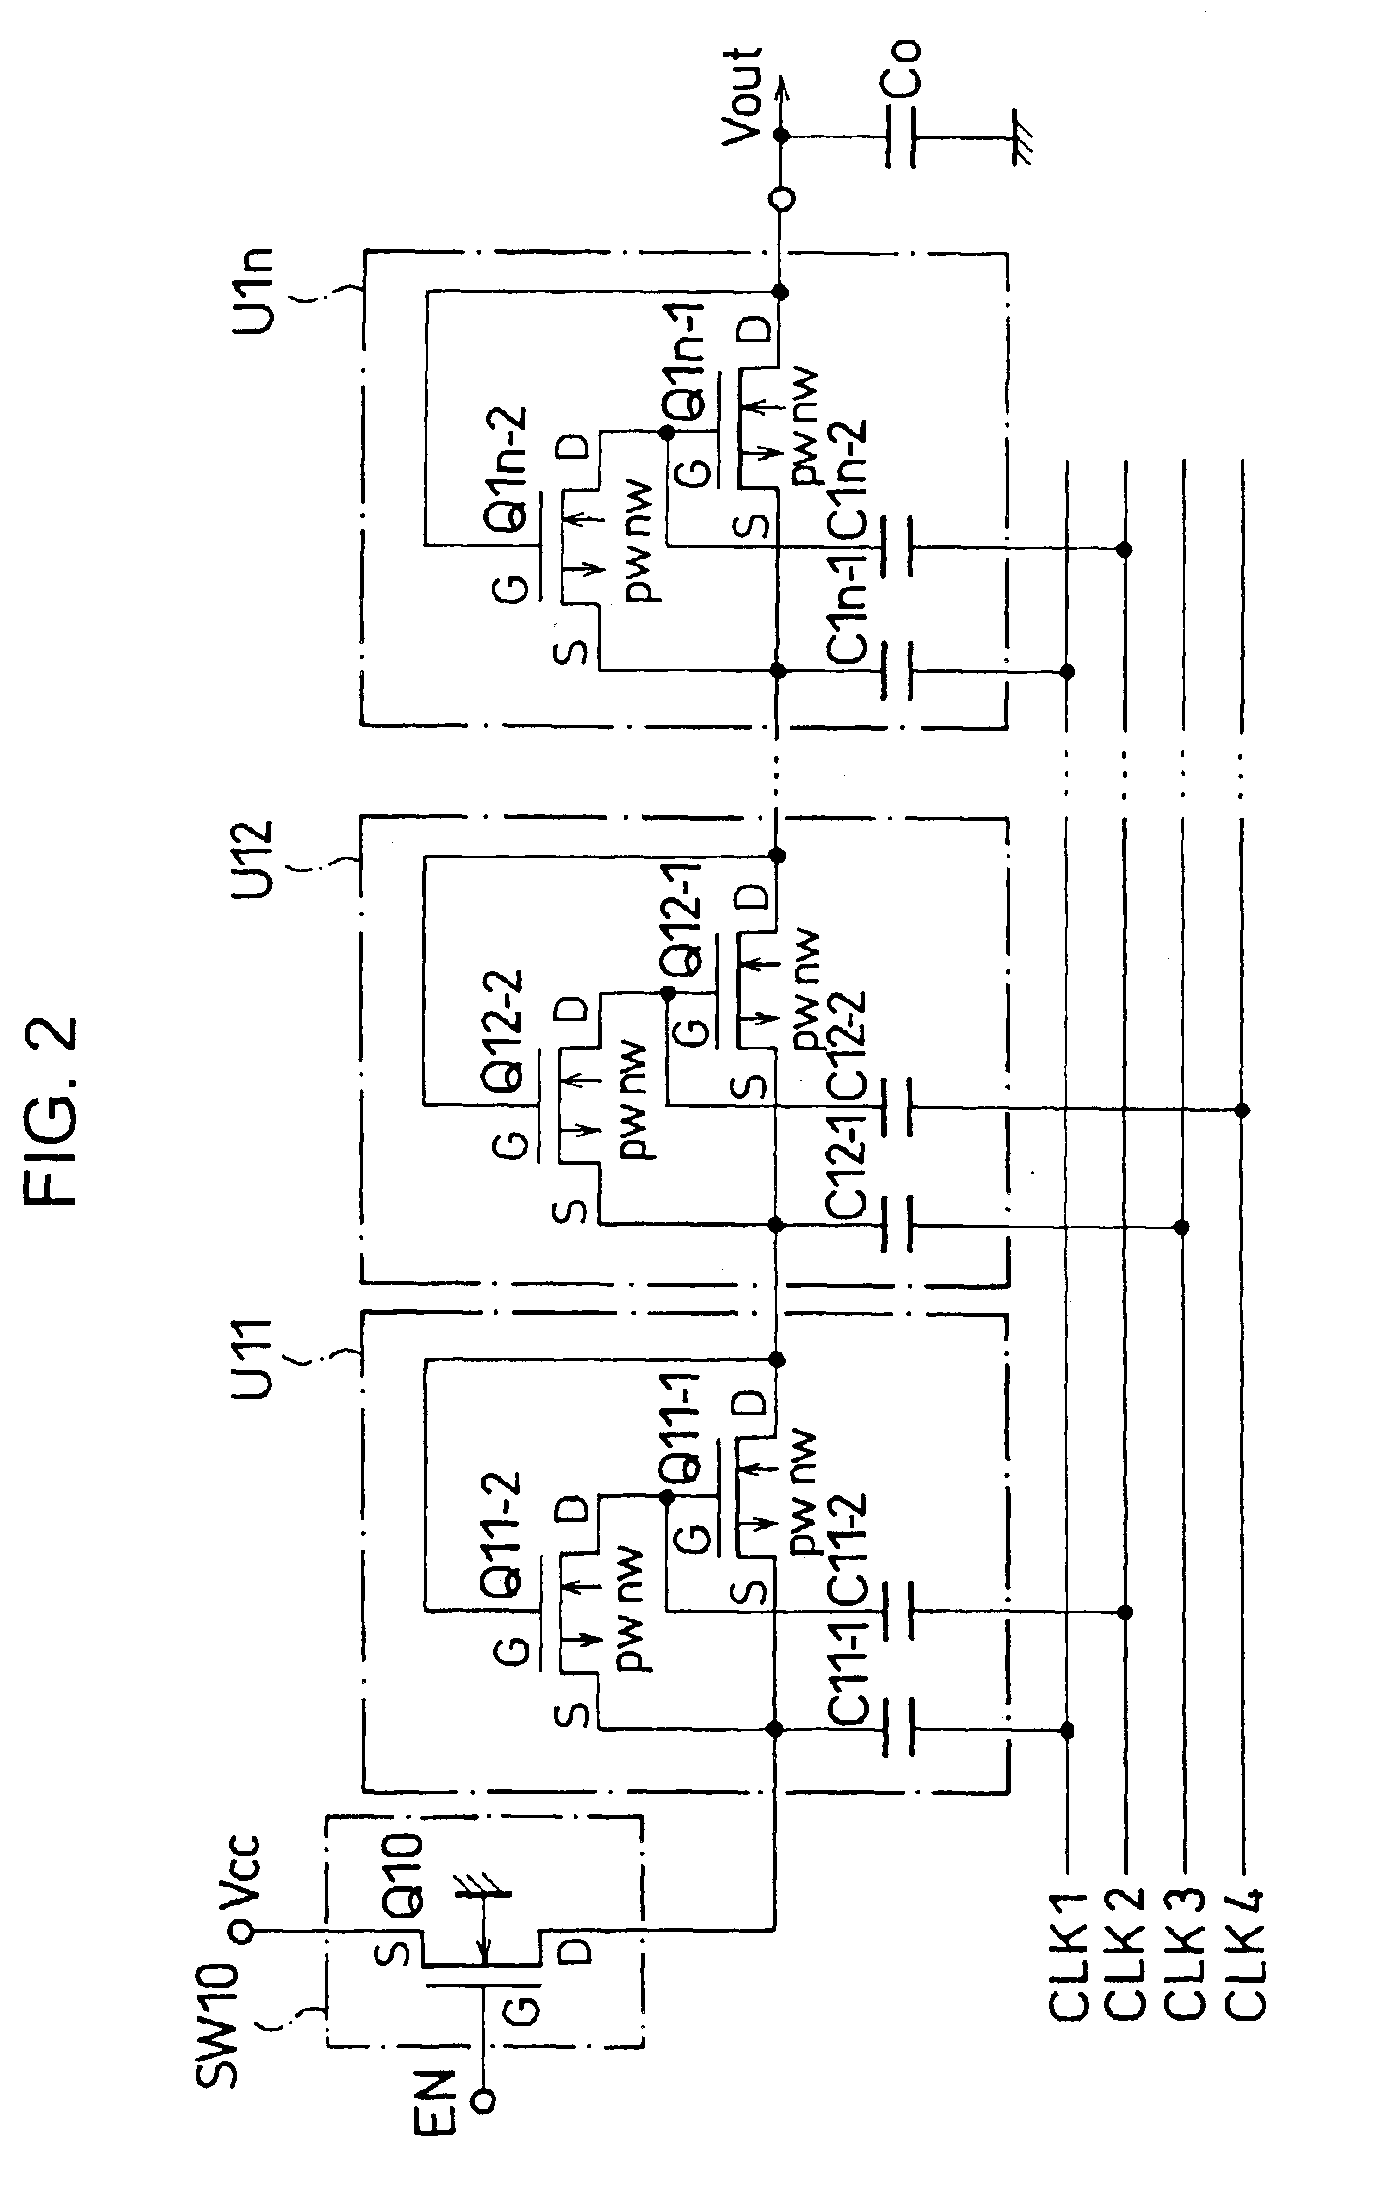 Semiconductor device equipped with a voltage step-up circuit